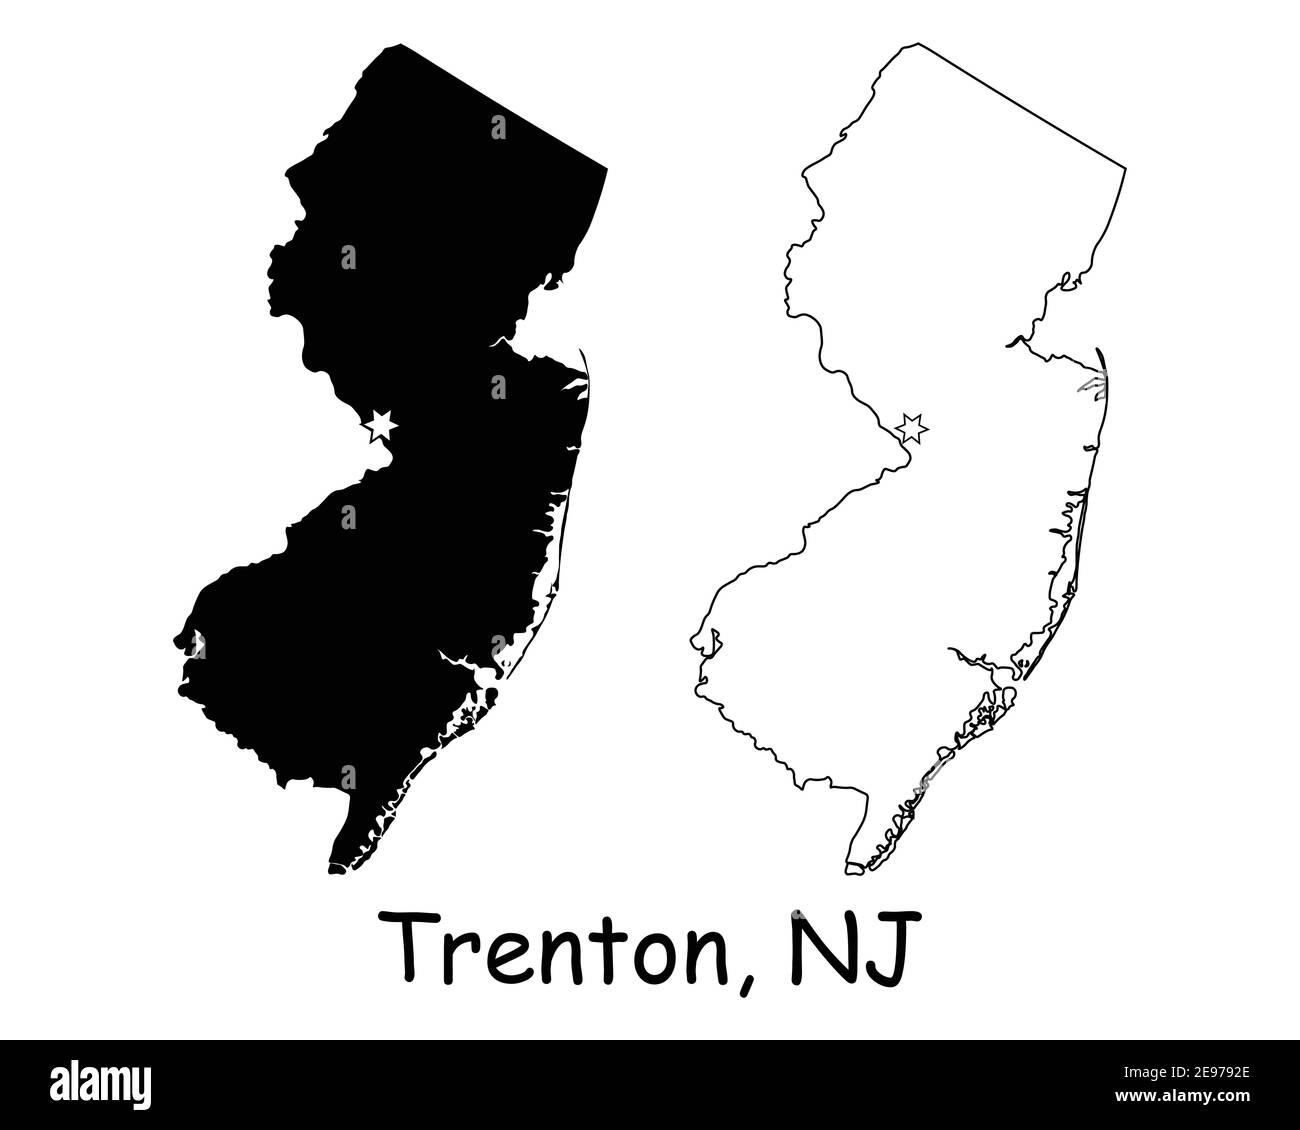 New Jersey NJ state Map USA with Capital City Star at Trenton. Black silhouette and outline isolated on a white background. EPS Vector Stock Vector